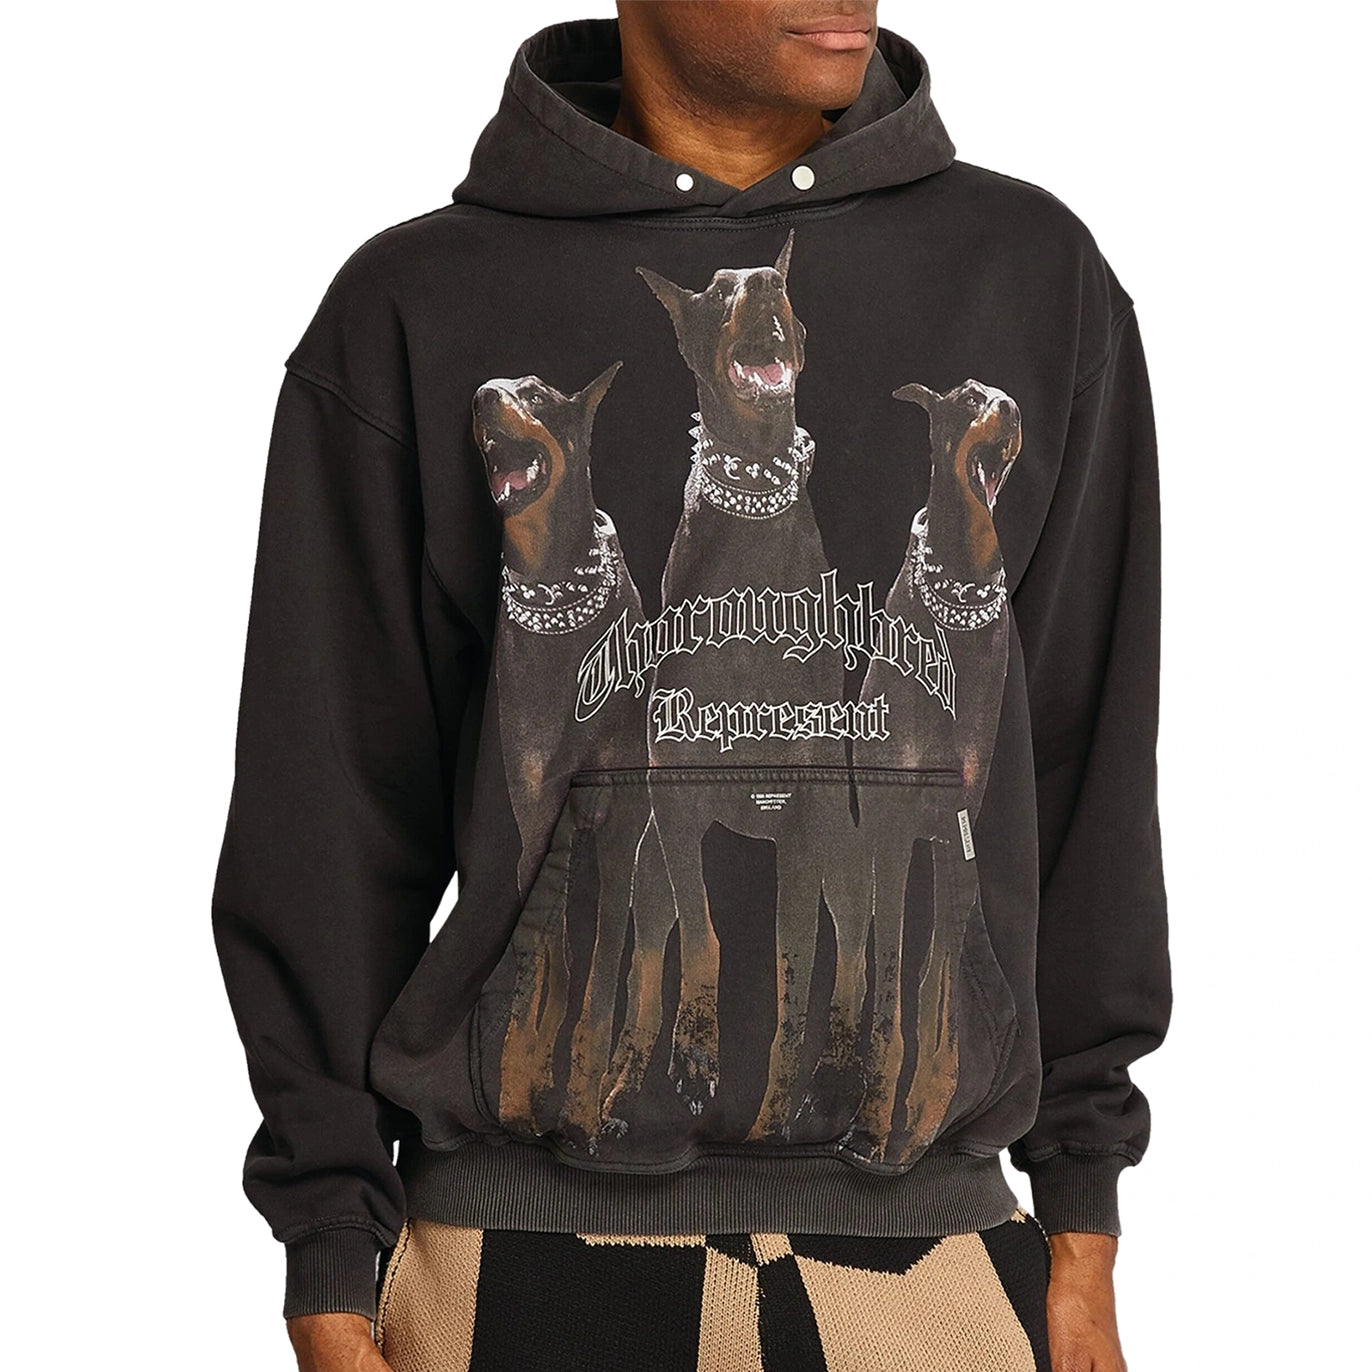 Model fromt view of Represent Thoroughbred Vintage Black Hoodie M04149-03